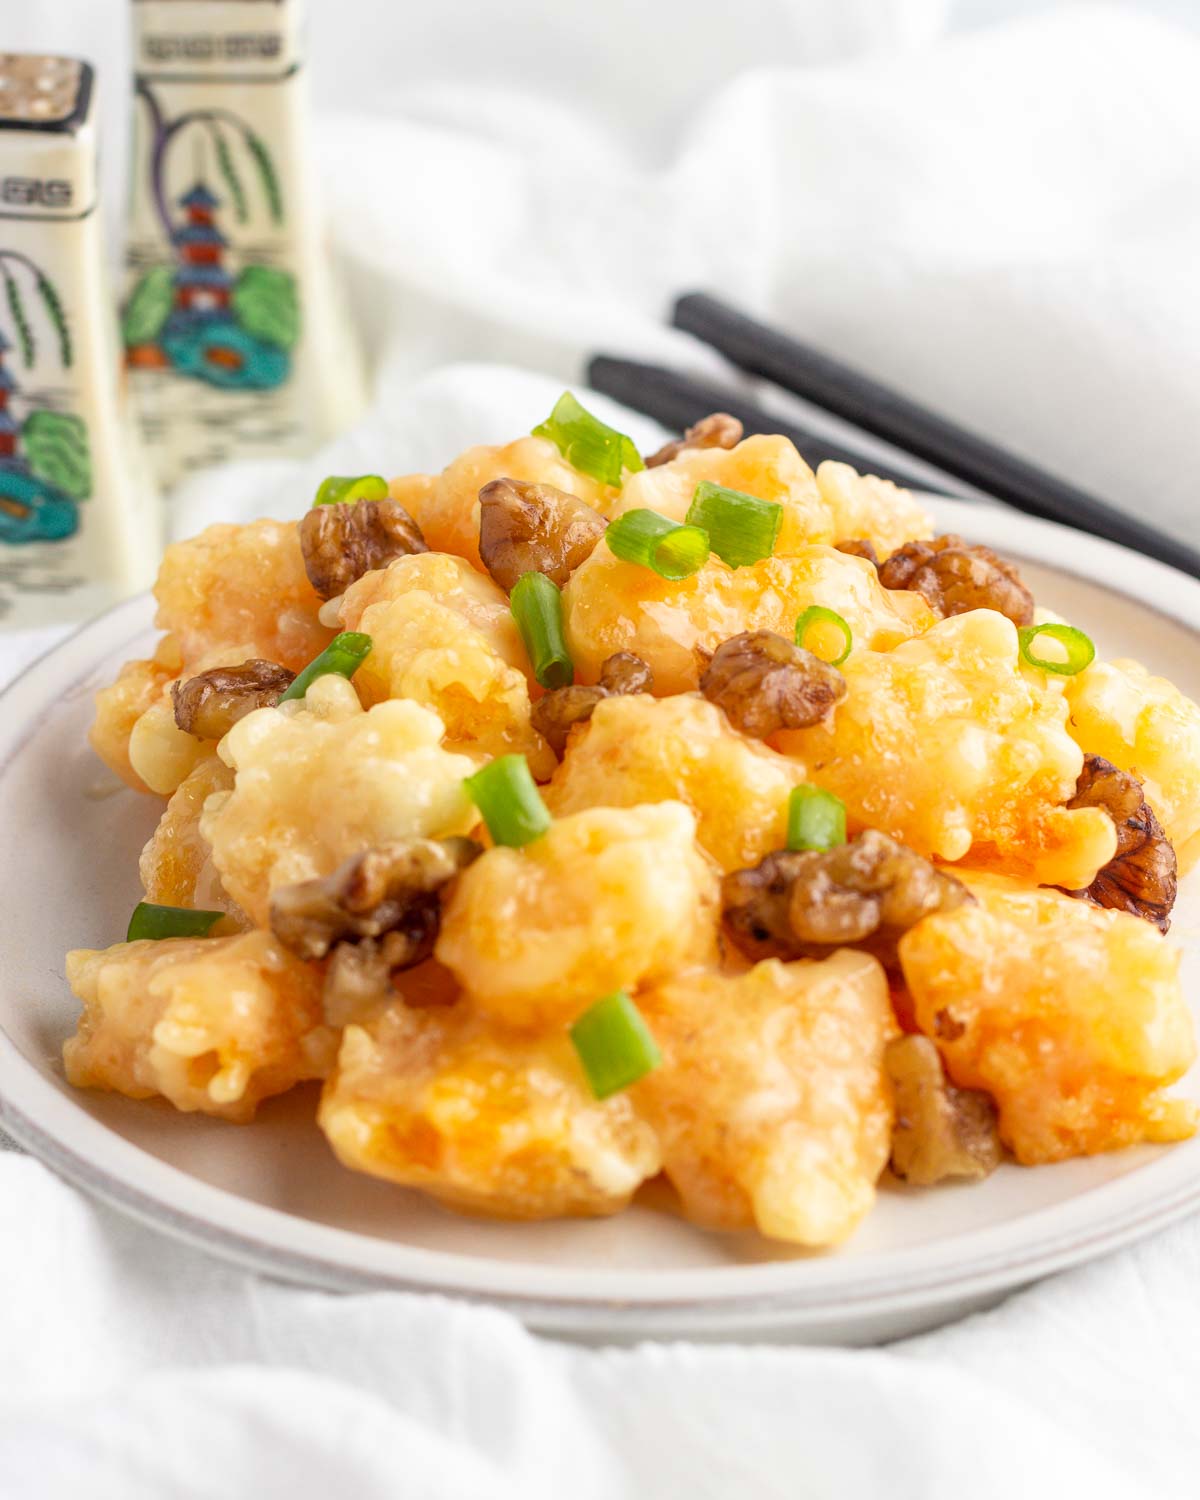 A plate of honey walnut shrimp with a green onion garnish on a plate.